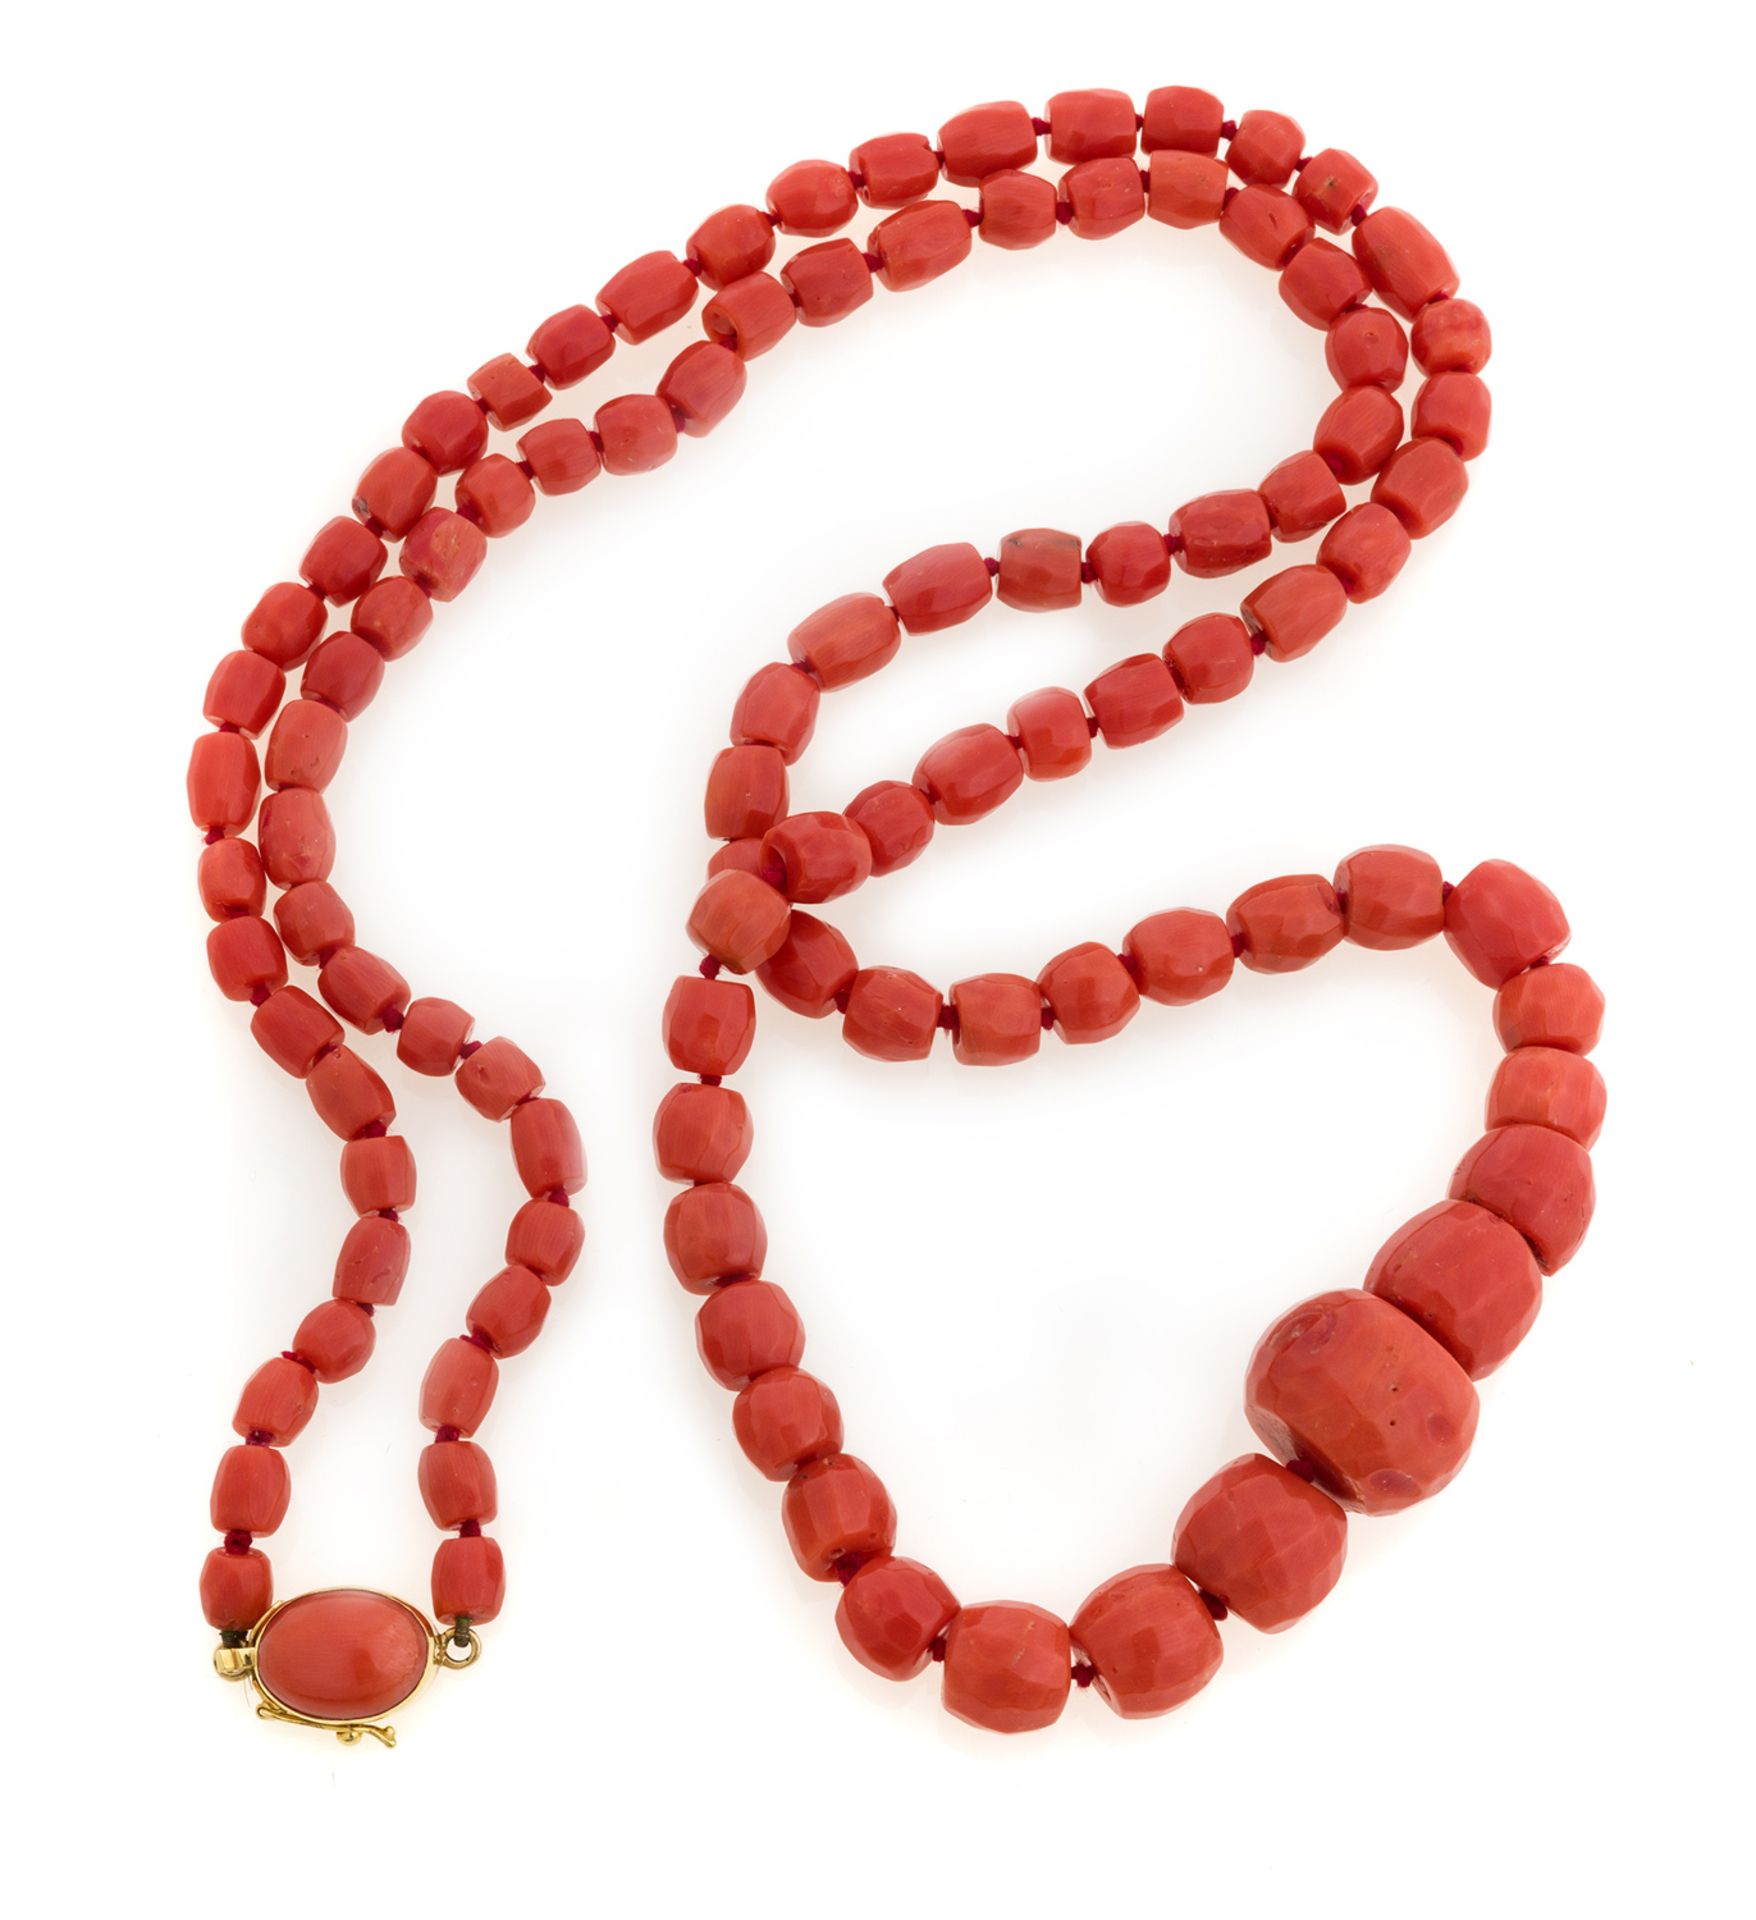 BEAUTIFUL CORAL NECKLACE